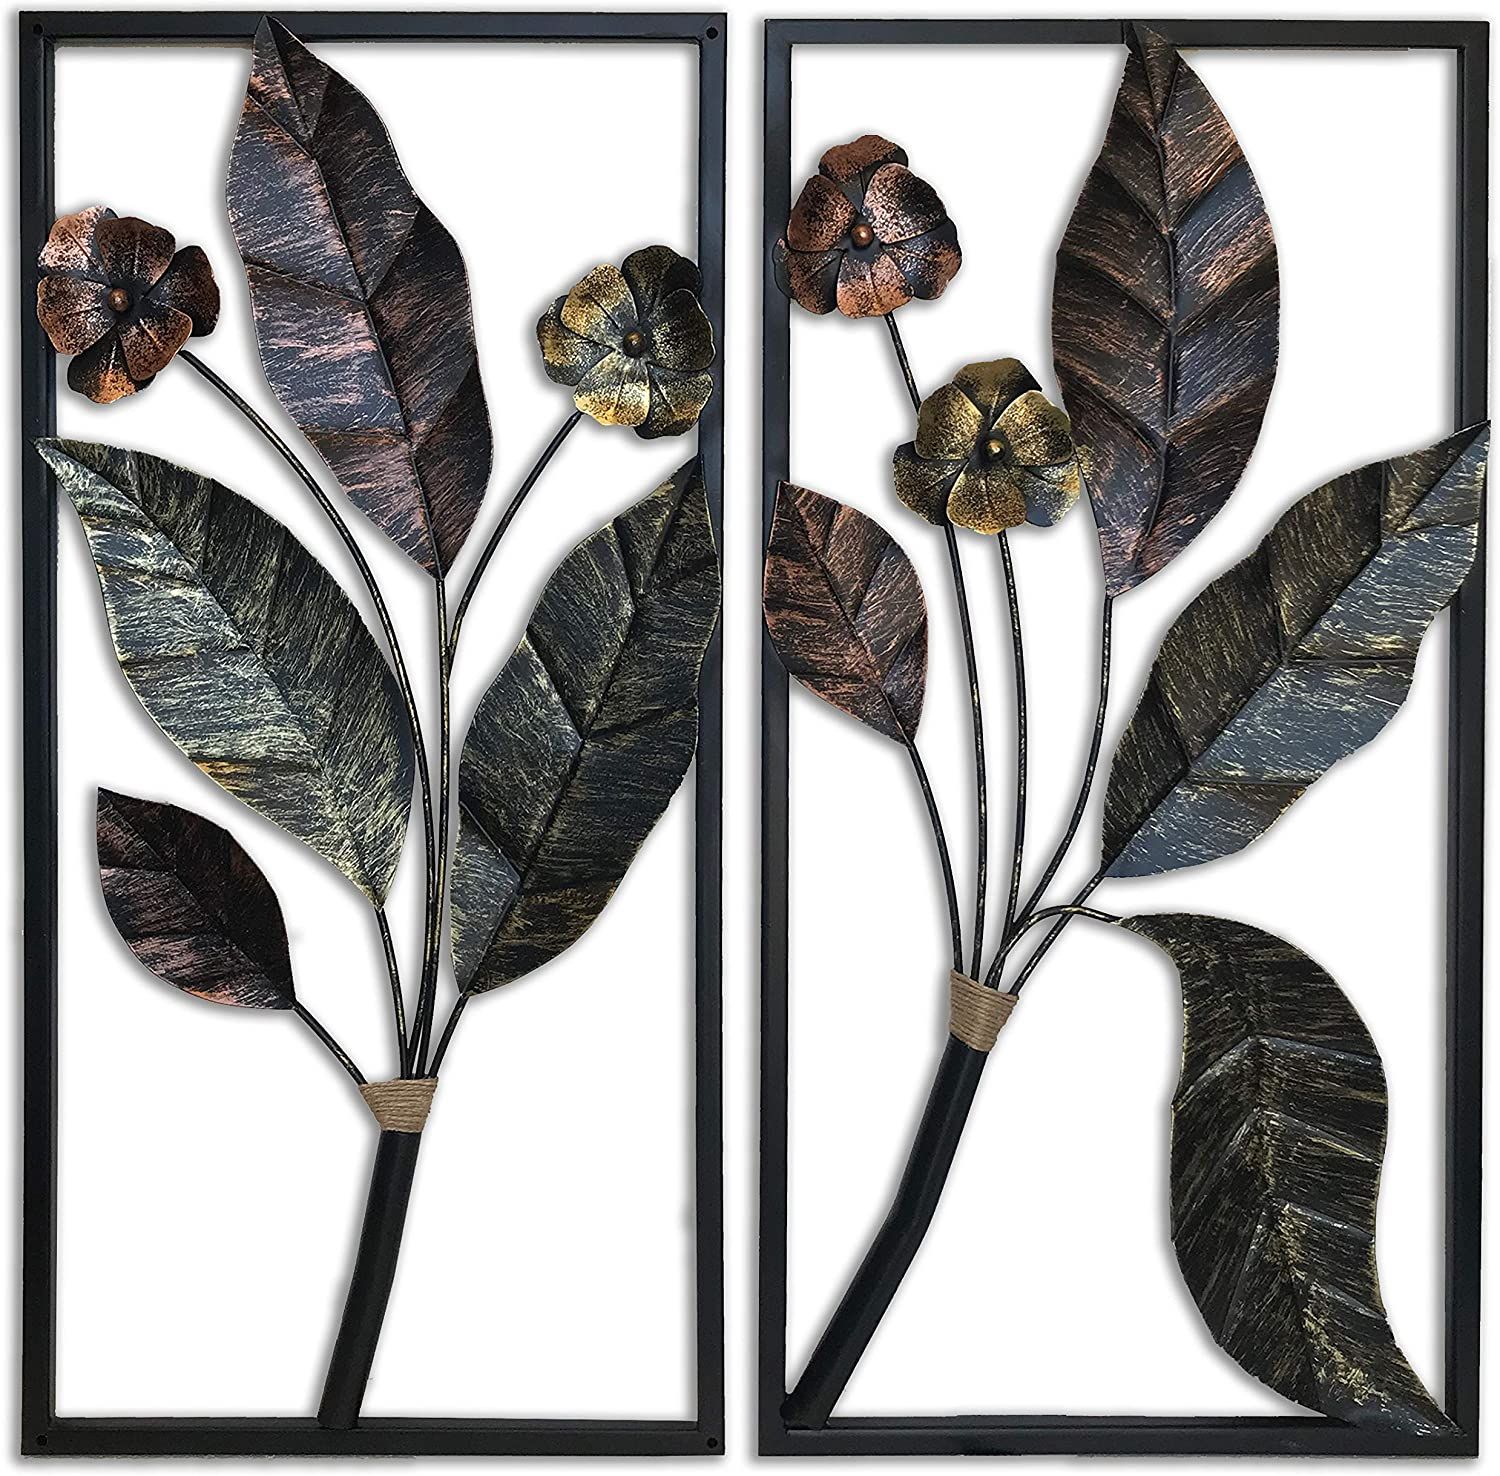 Decorshore Contemporary Metal Wall Art | Wall Decorations | Modern Inside Most Current Polished Metal Wall Art (View 13 of 20)